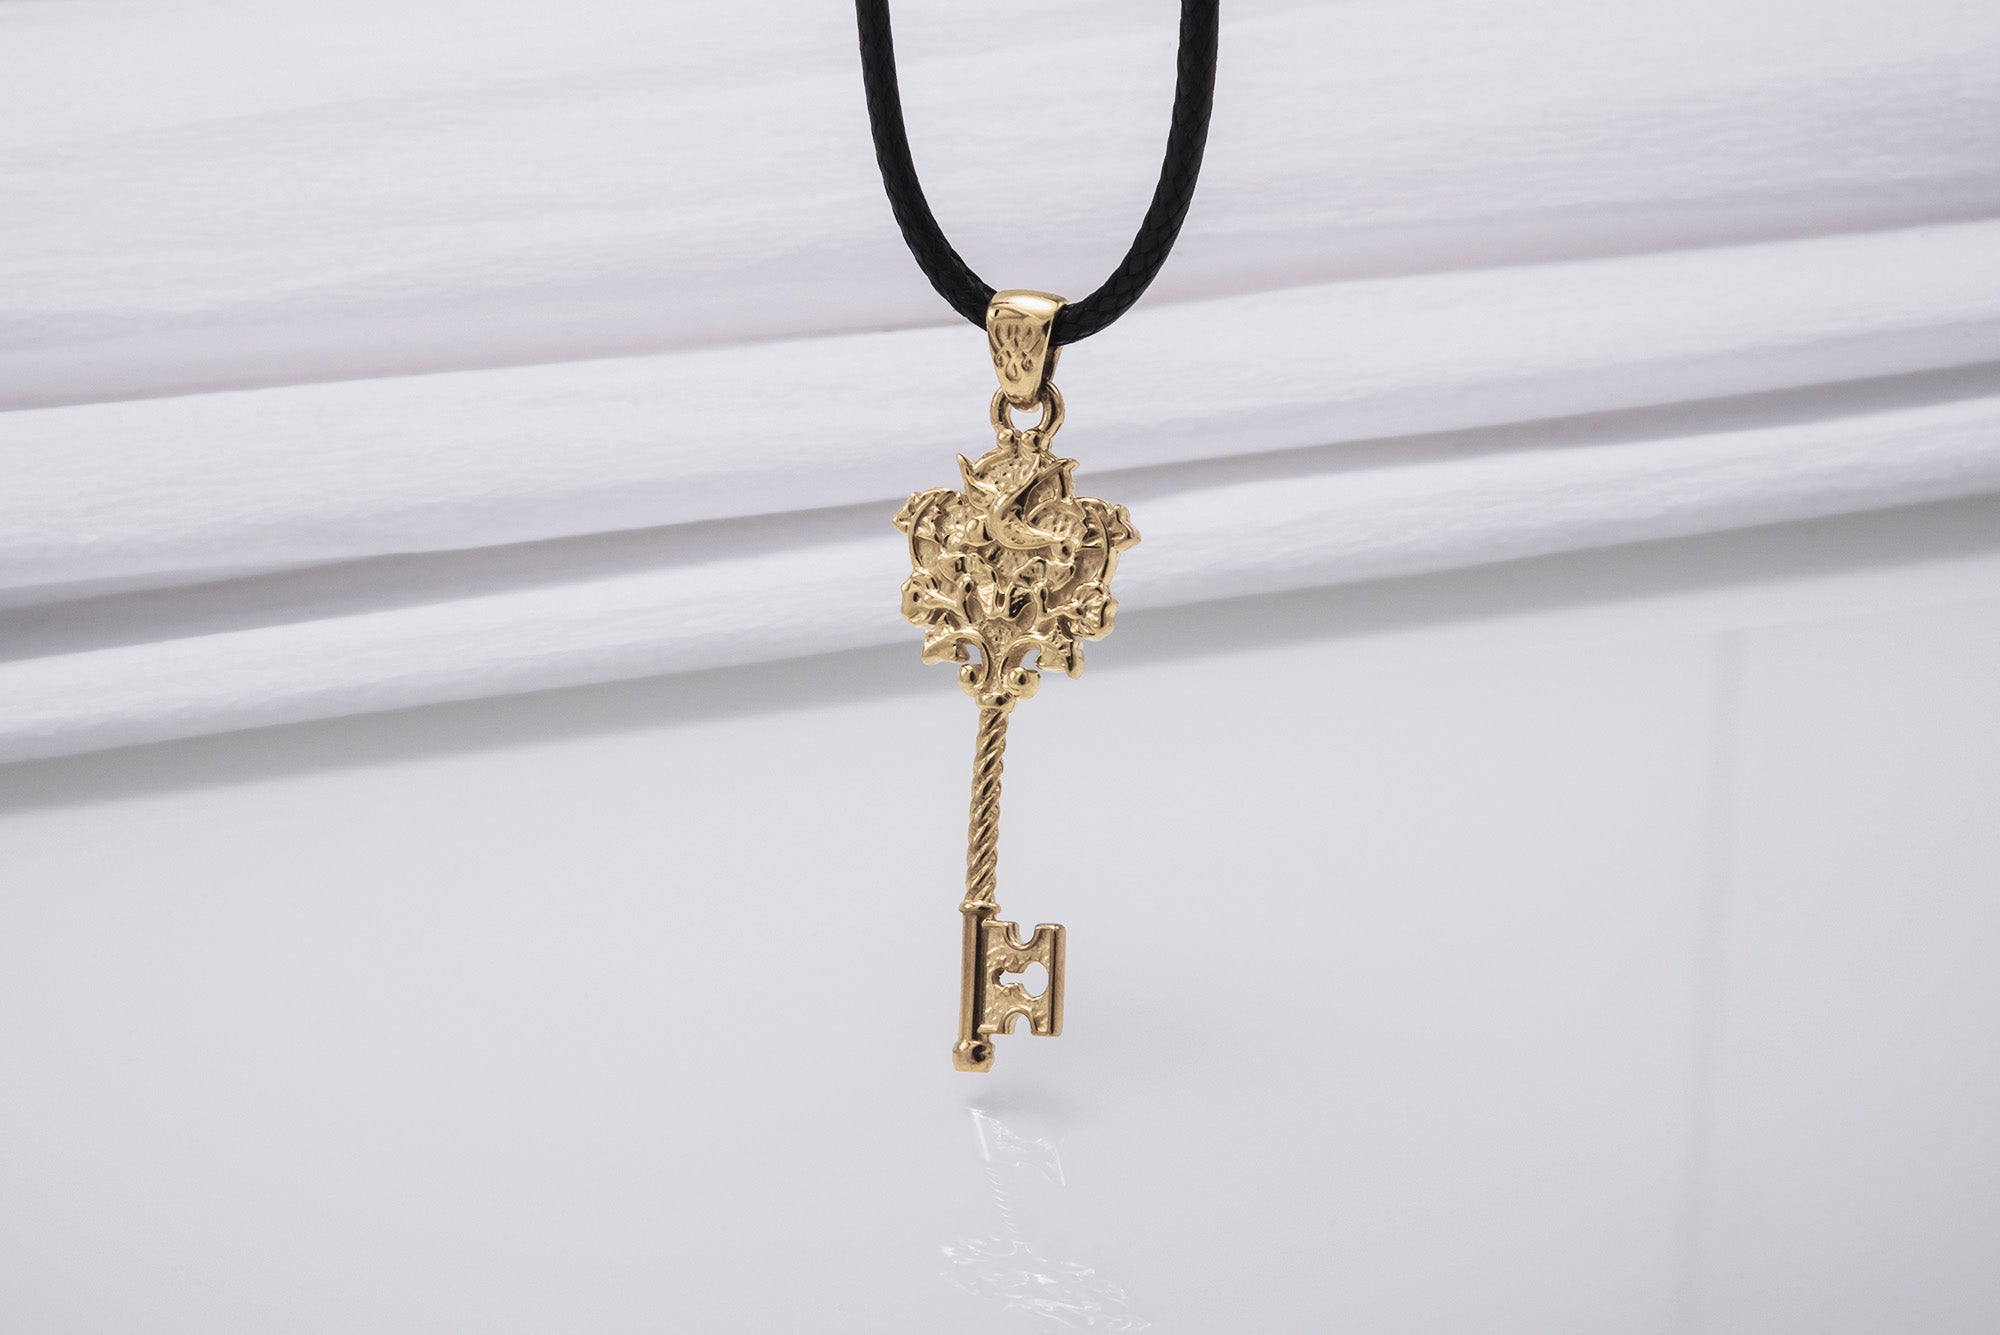 14K Gold Key Pendant with Bird and Flowers Jewelry